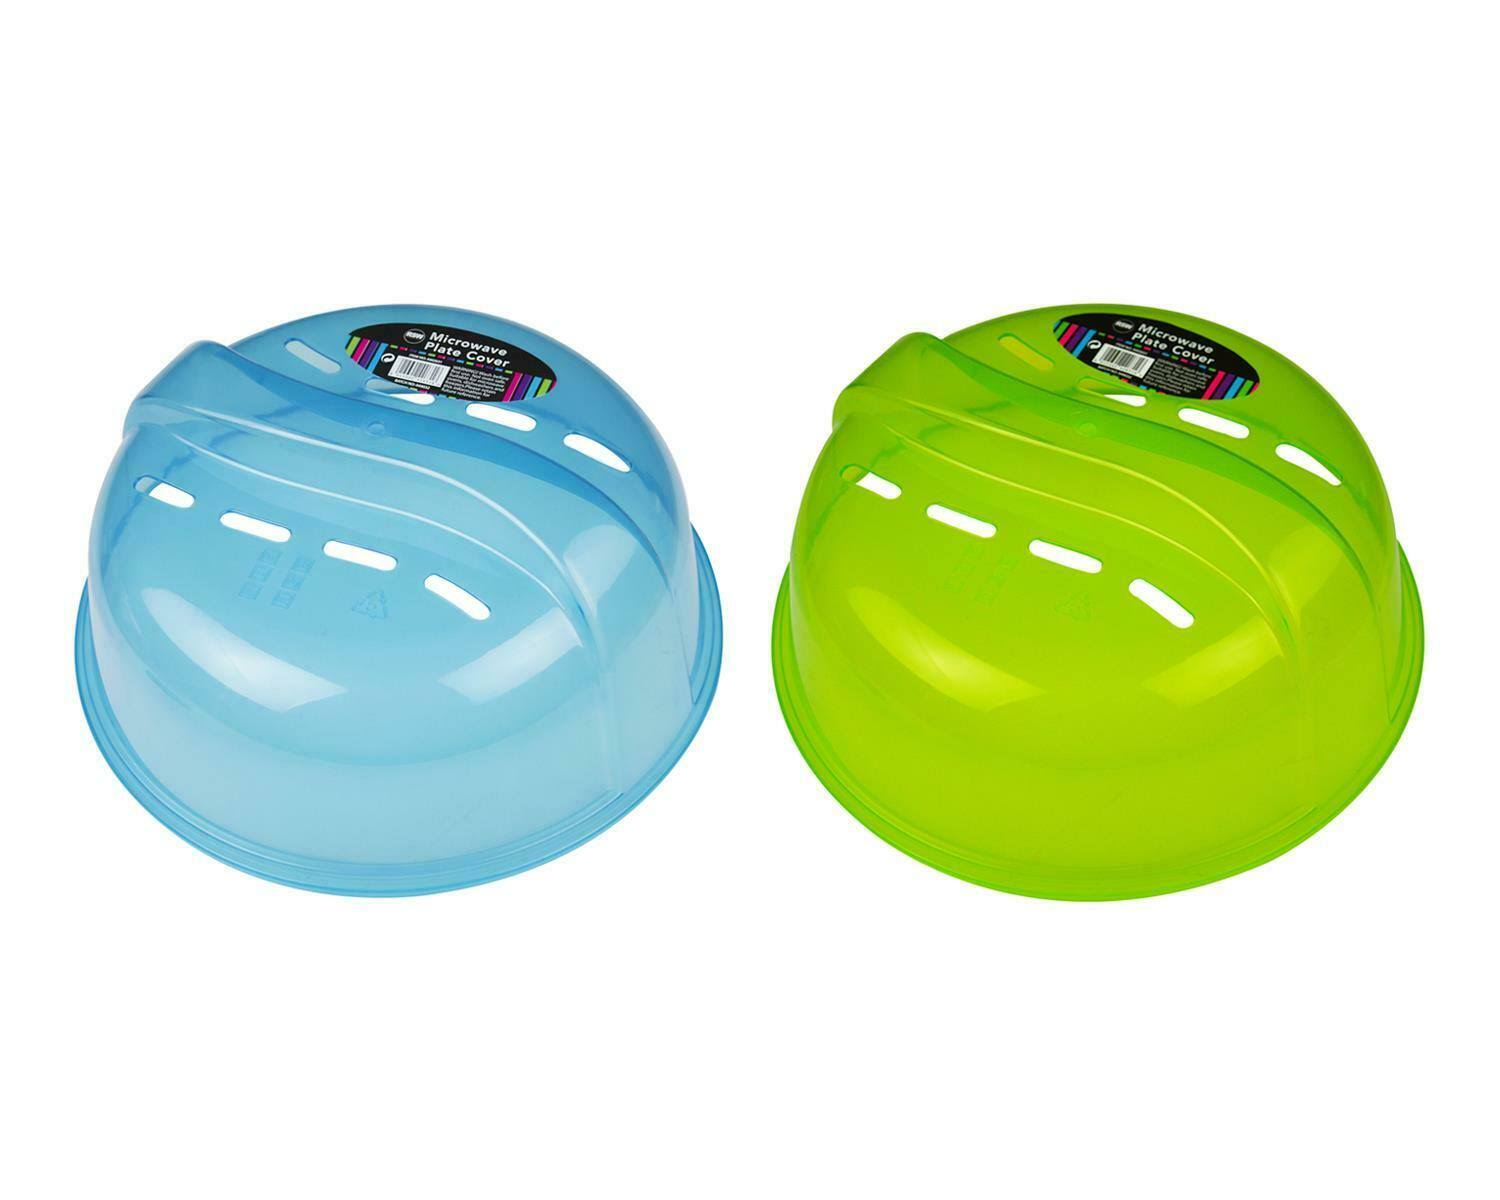 2x Microwave Plate Cover Food Dish Lid Air Vents Handle Kitchen Clear Blue Green